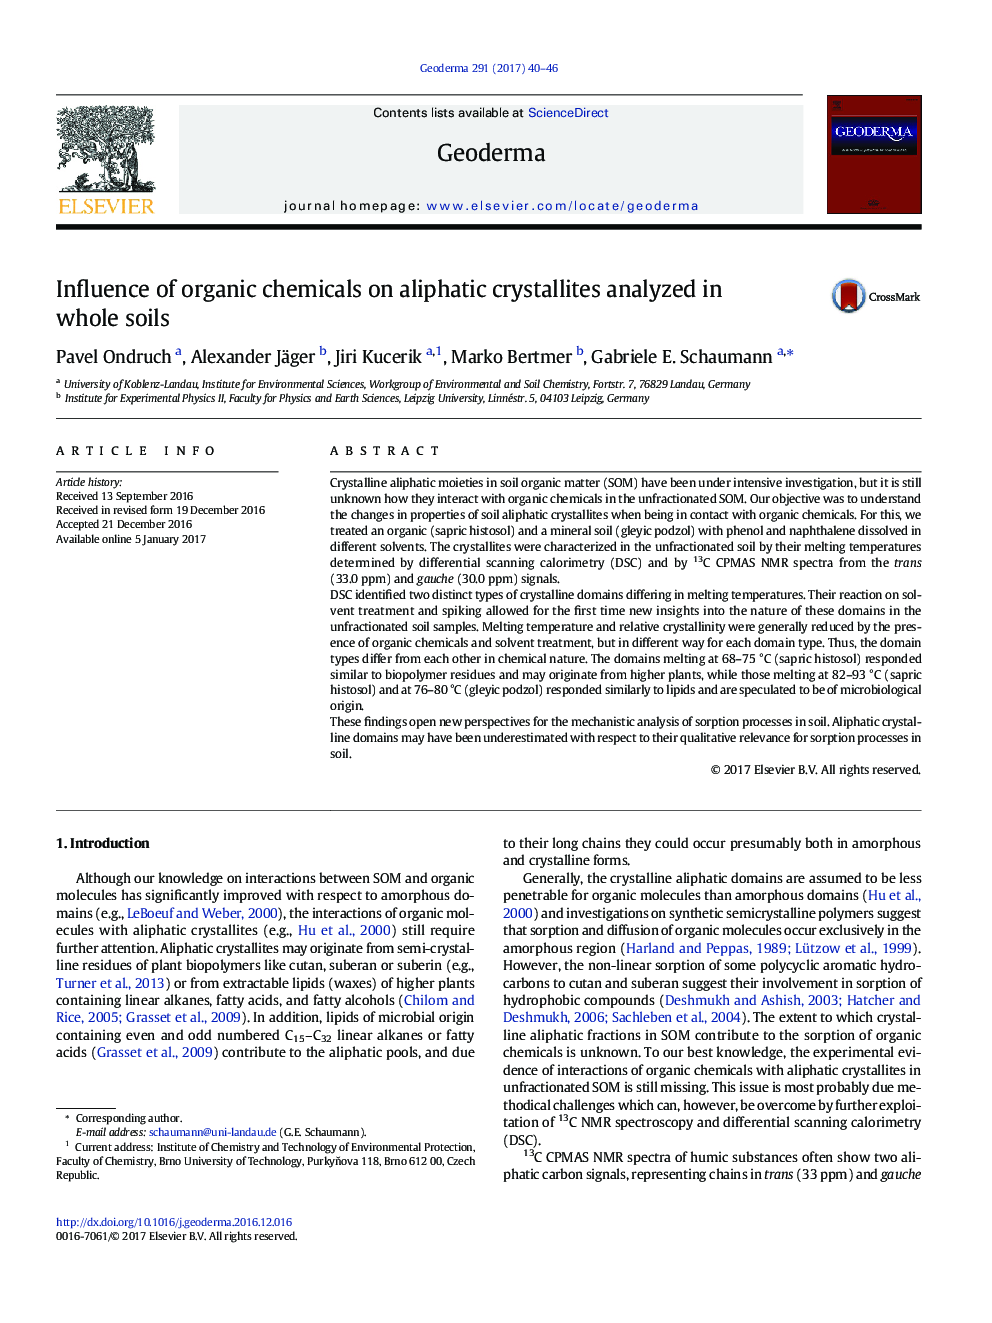 Influence of organic chemicals on aliphatic crystallites analyzed in whole soils